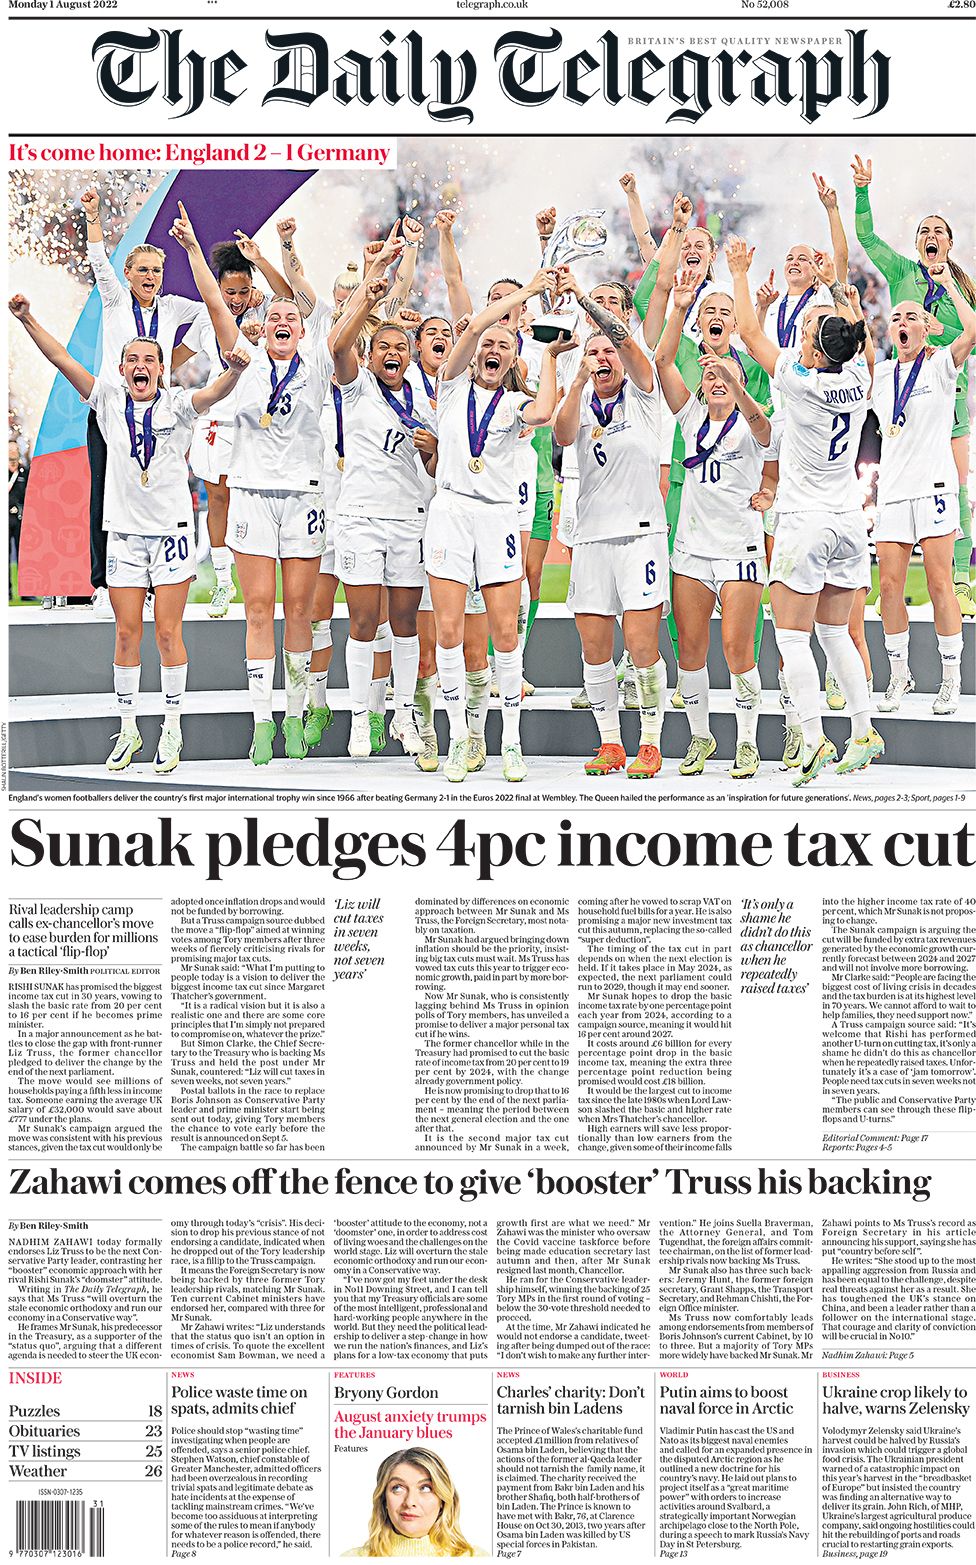 The Daily Telegraph front page 1 August 2022